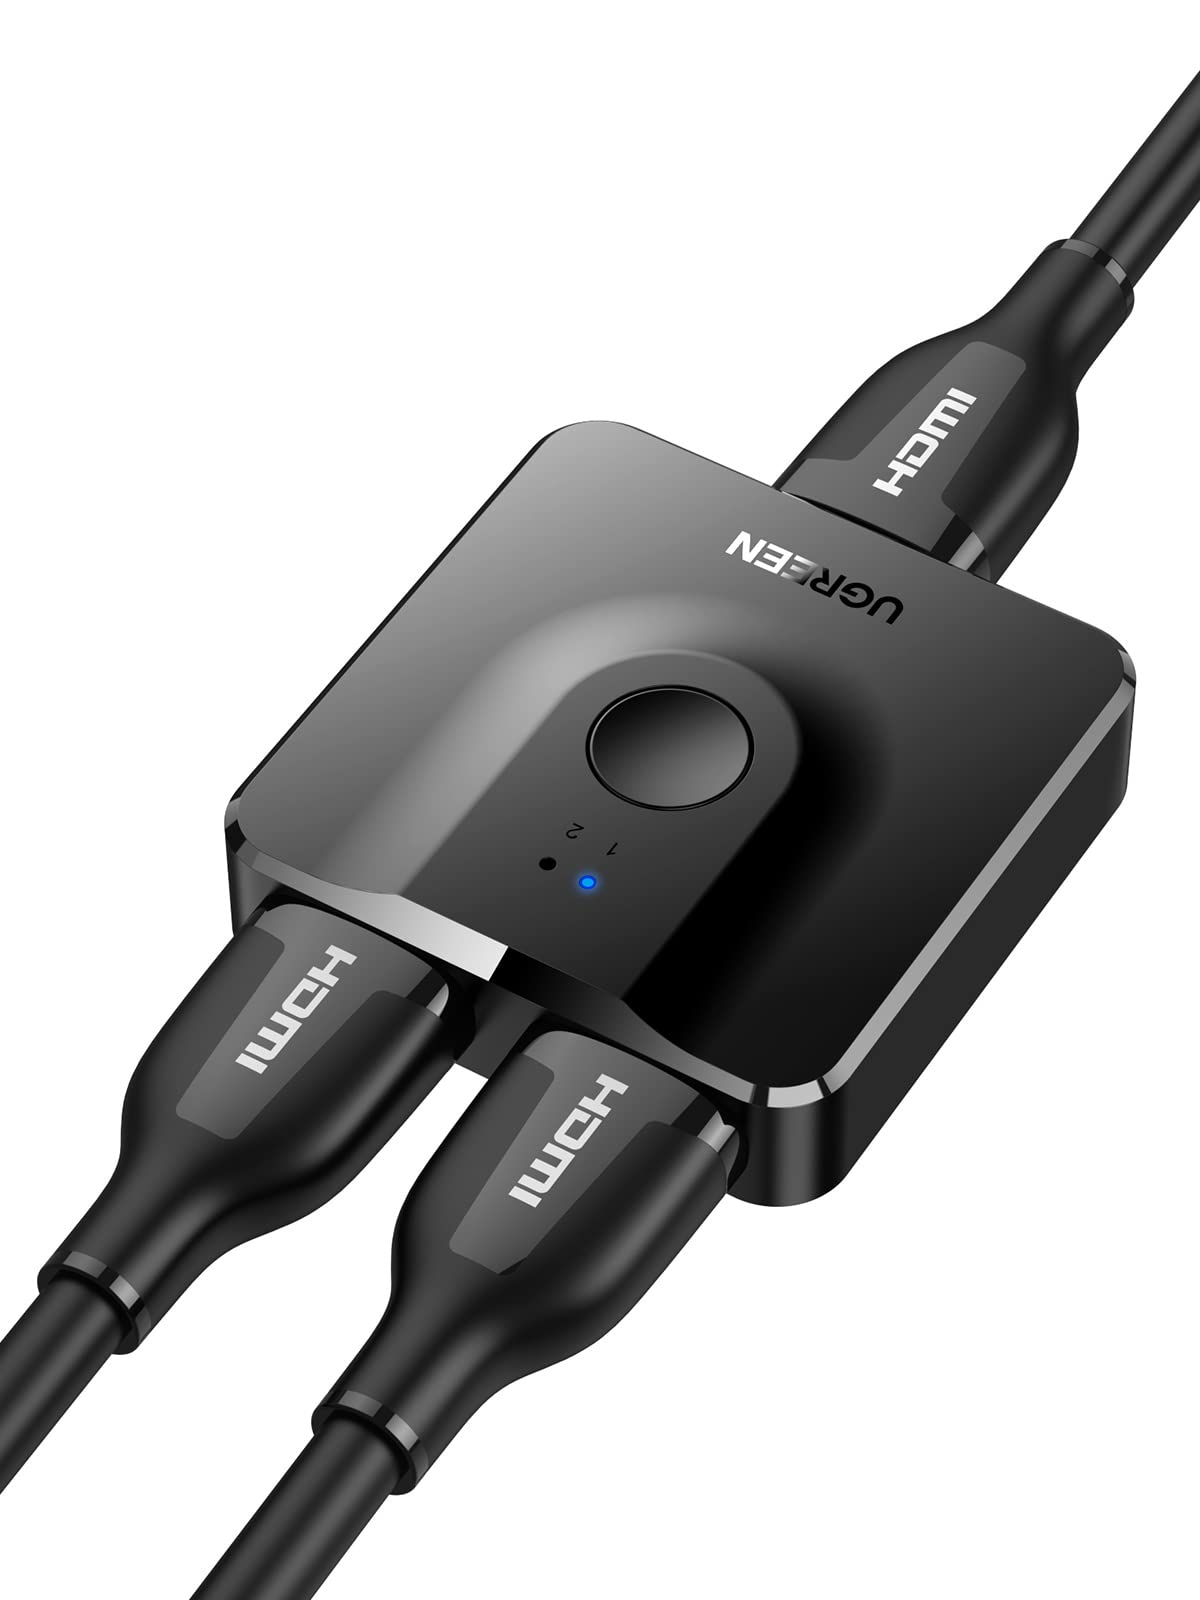  UGREEN HDMI Switch 3 in 1 Out 4K HDMI Splitter, HDMI